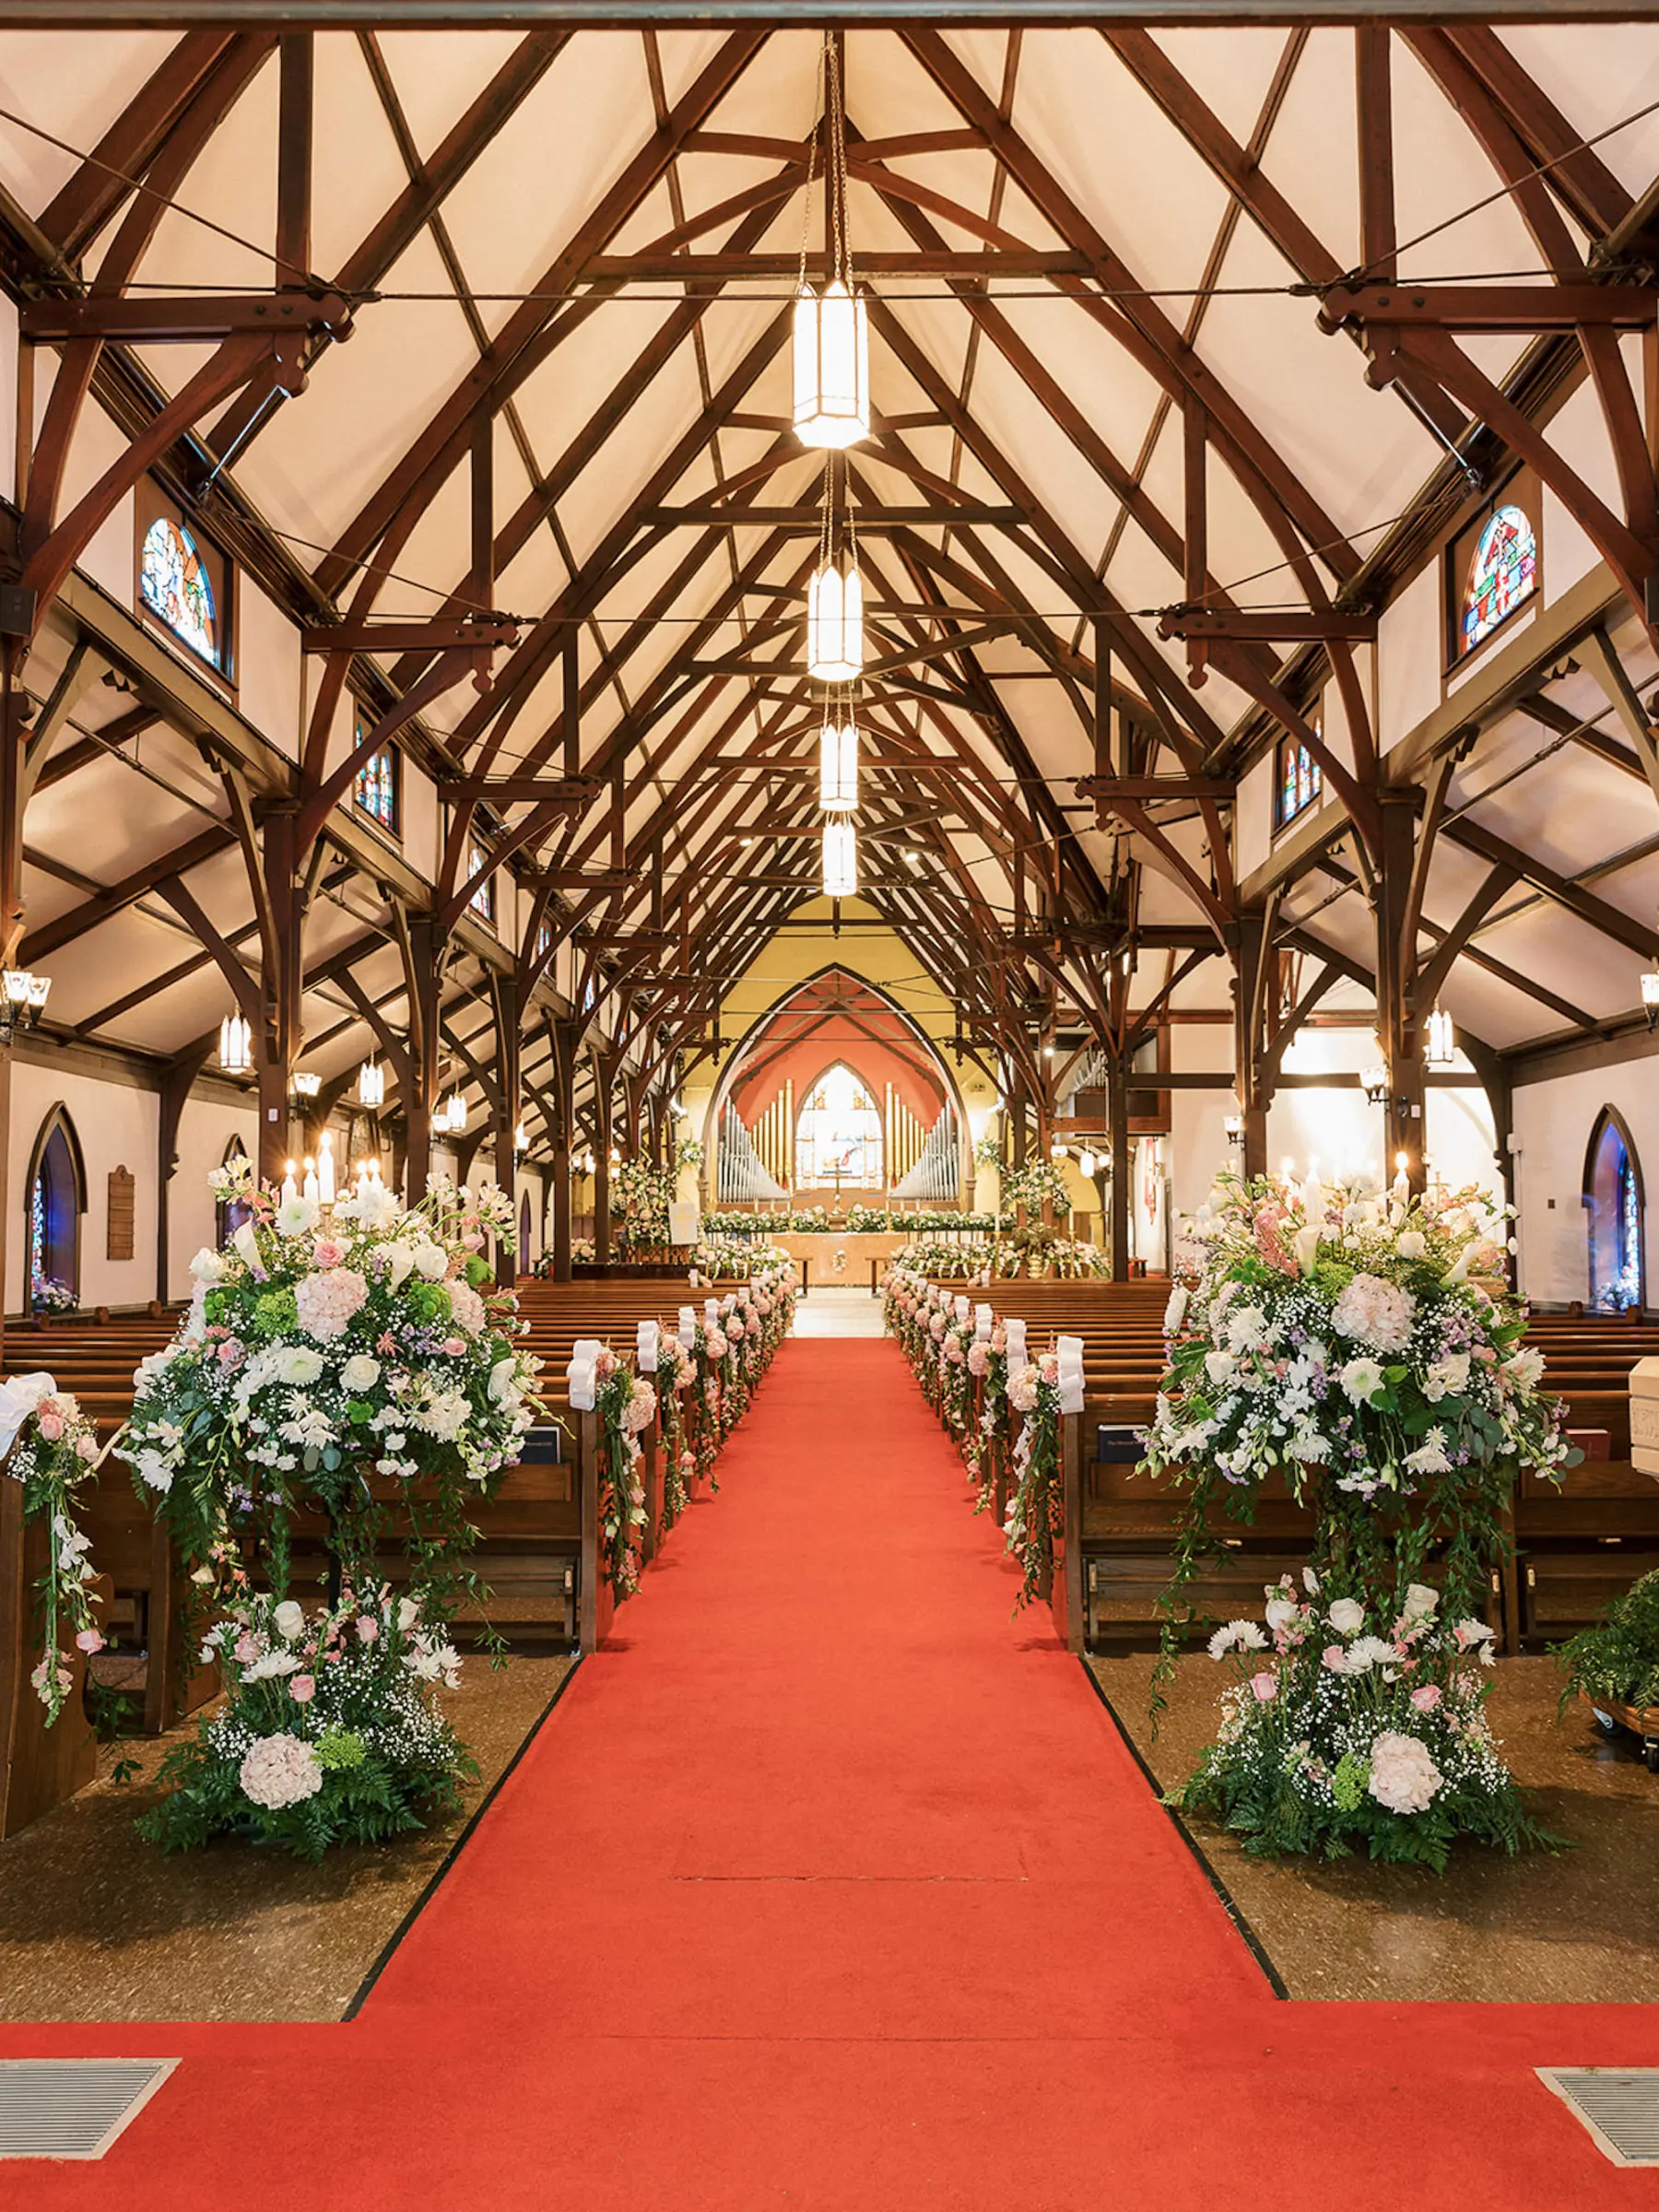 Episcopal Church Wedding Ceremony Aisle Decor Ideas | White Daisy, Roses, Calla Lily, Hydrangea, Baby's Breath, and Greenery Floral Arrangement Inspiration | Tampa Bay Planner Unique Weddings and Events | Cathedral Church of St. Peter St Pete